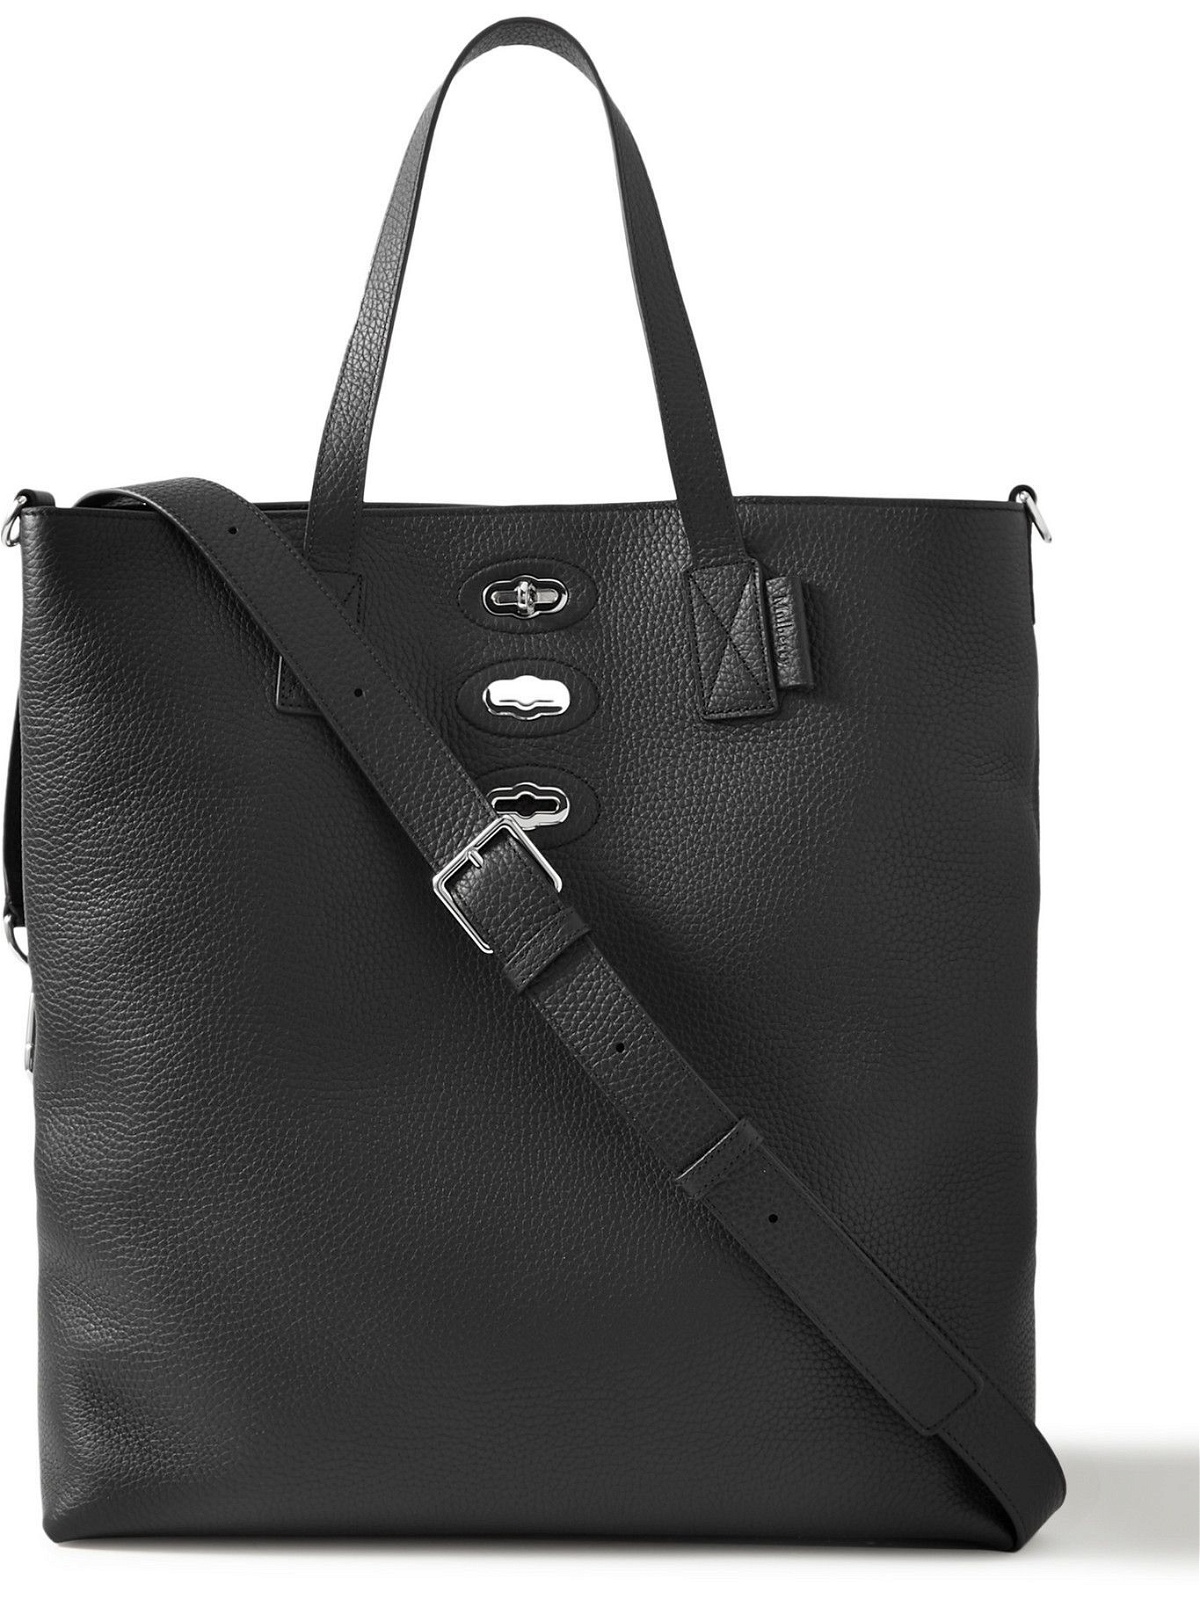 MULBERRY - Bryn Full-Grain Leather Tote Bag Mulberry